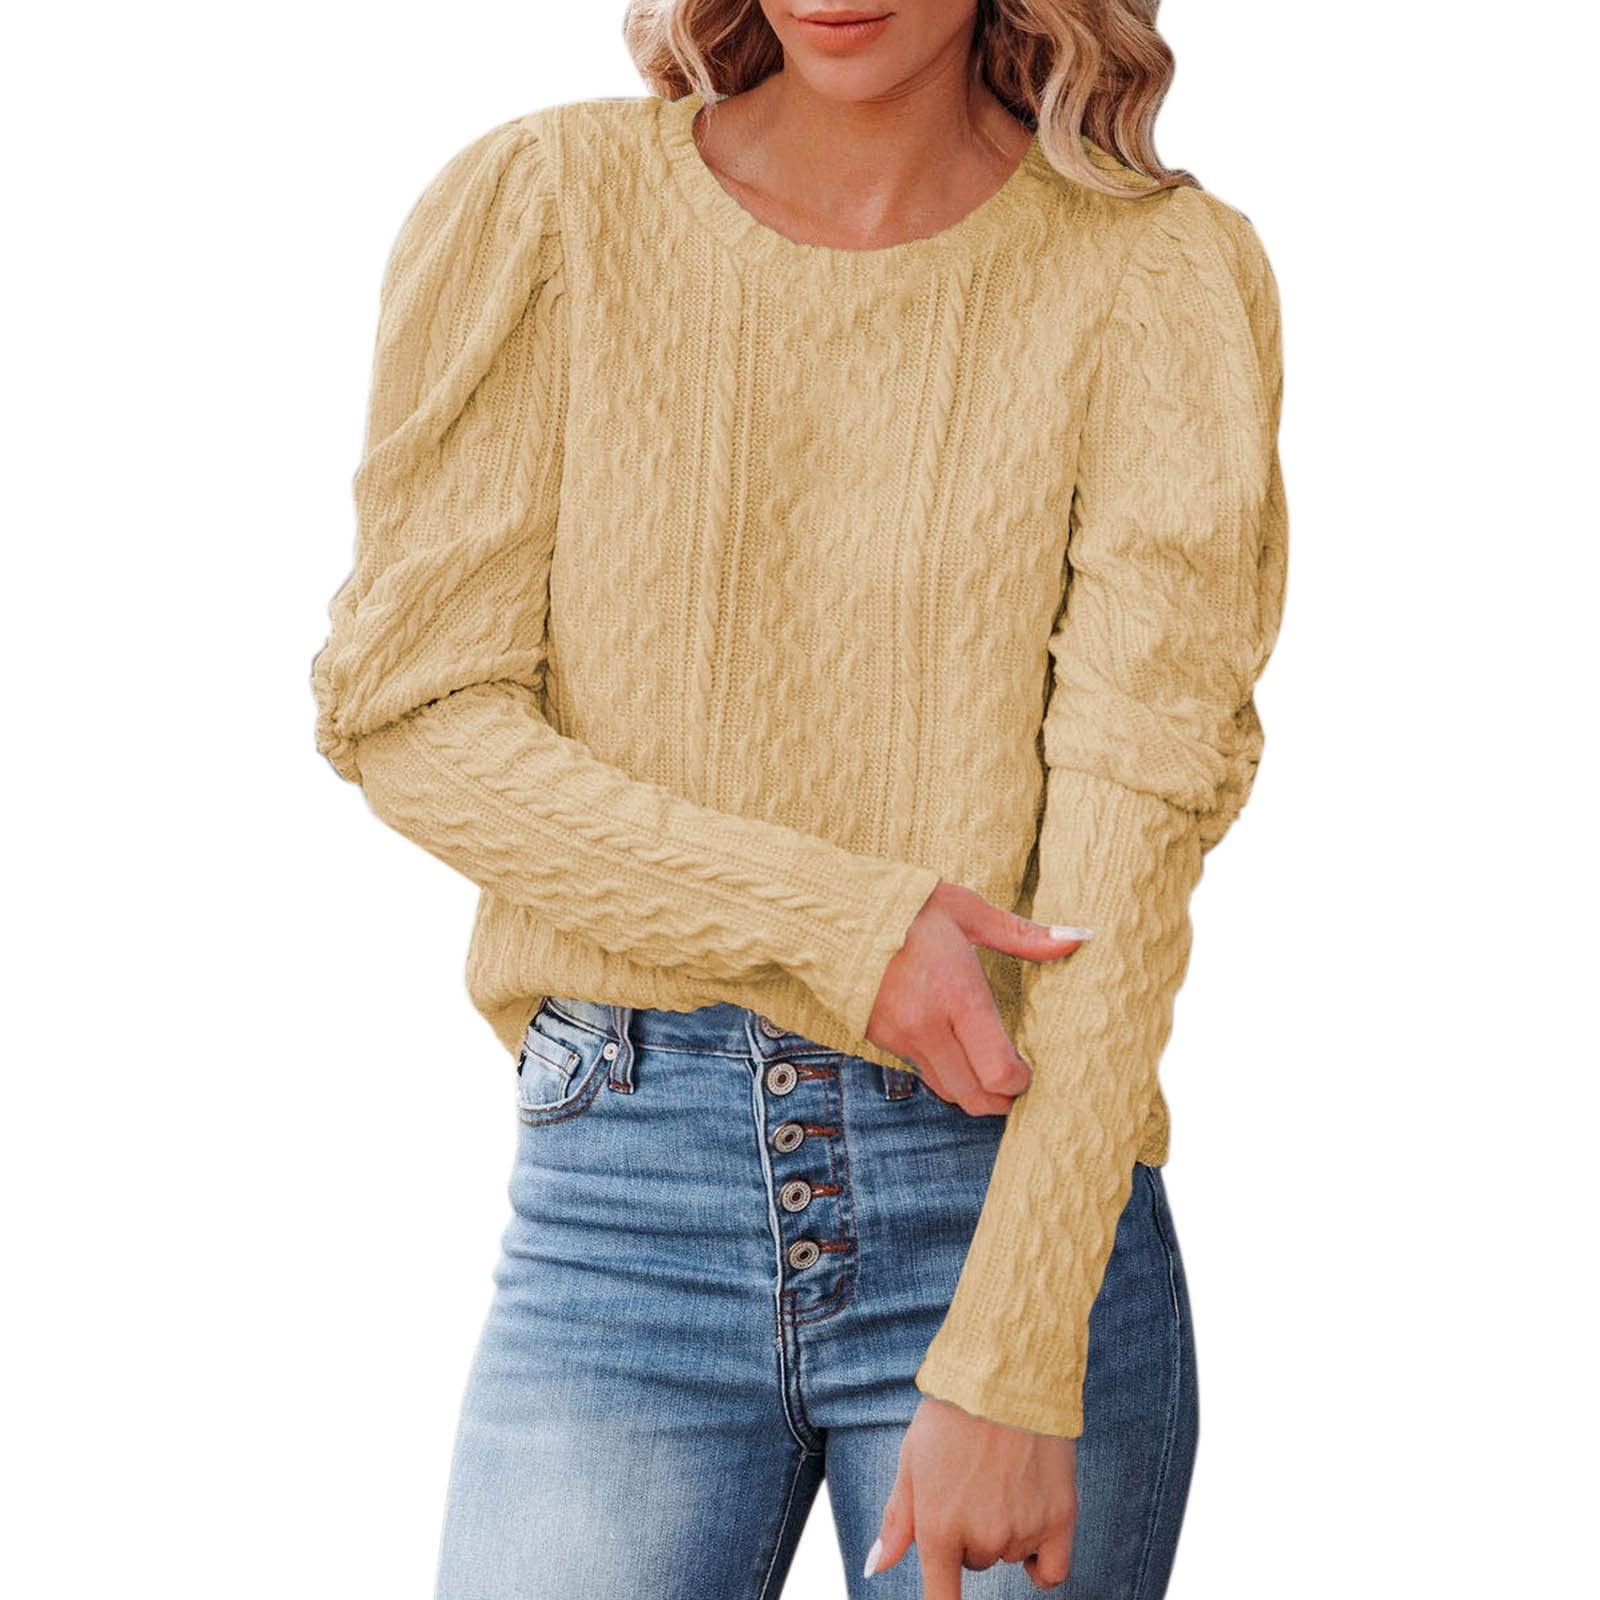 Sweater for Women Fashion Solid Color Slim Fit Crewneck Long Sleeve Pullover  Knitwear Fall Winter Business Cable Knit Dressy Tops - Walmart.com